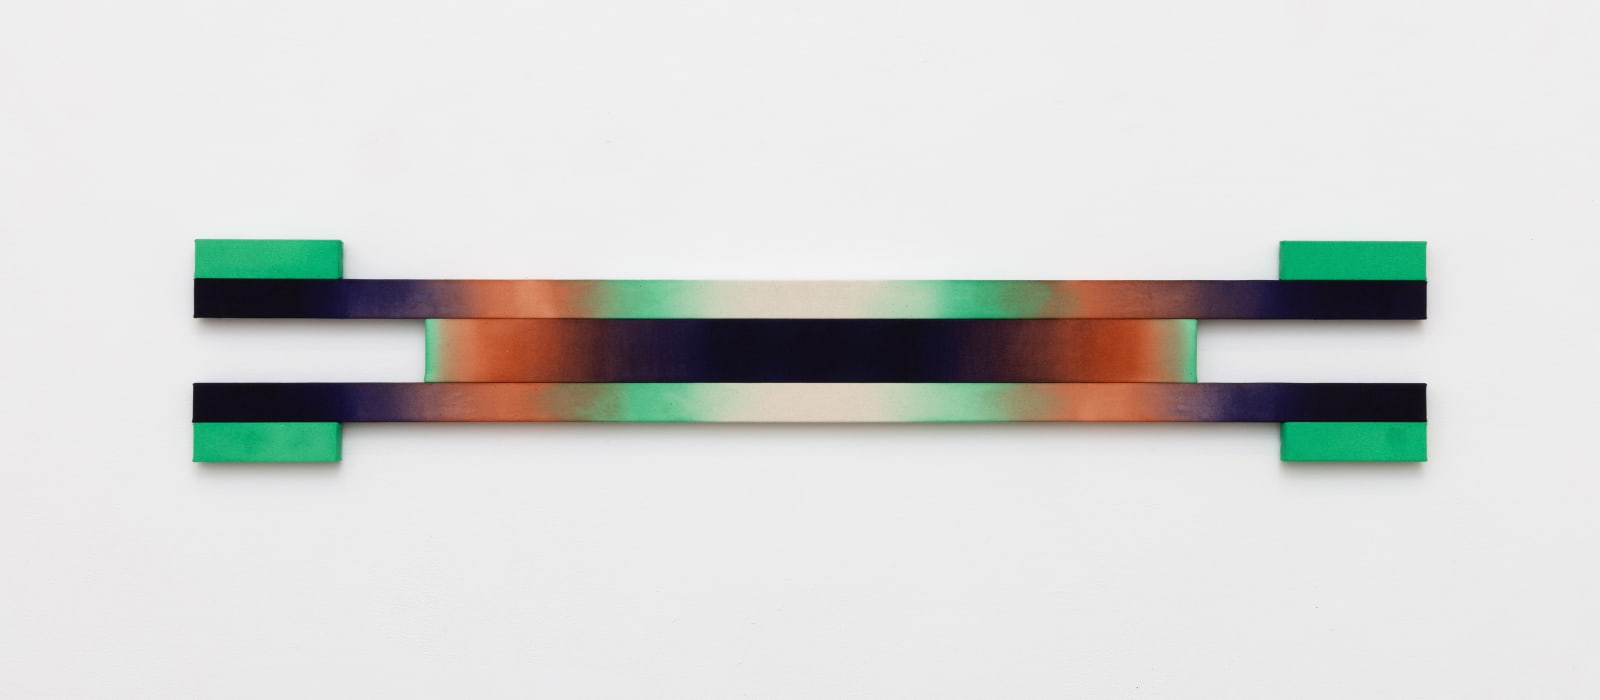 Horizontal shaped canvas painting stretched on seven wooden bars varying in length and colors of black, purple, orange, and green. 